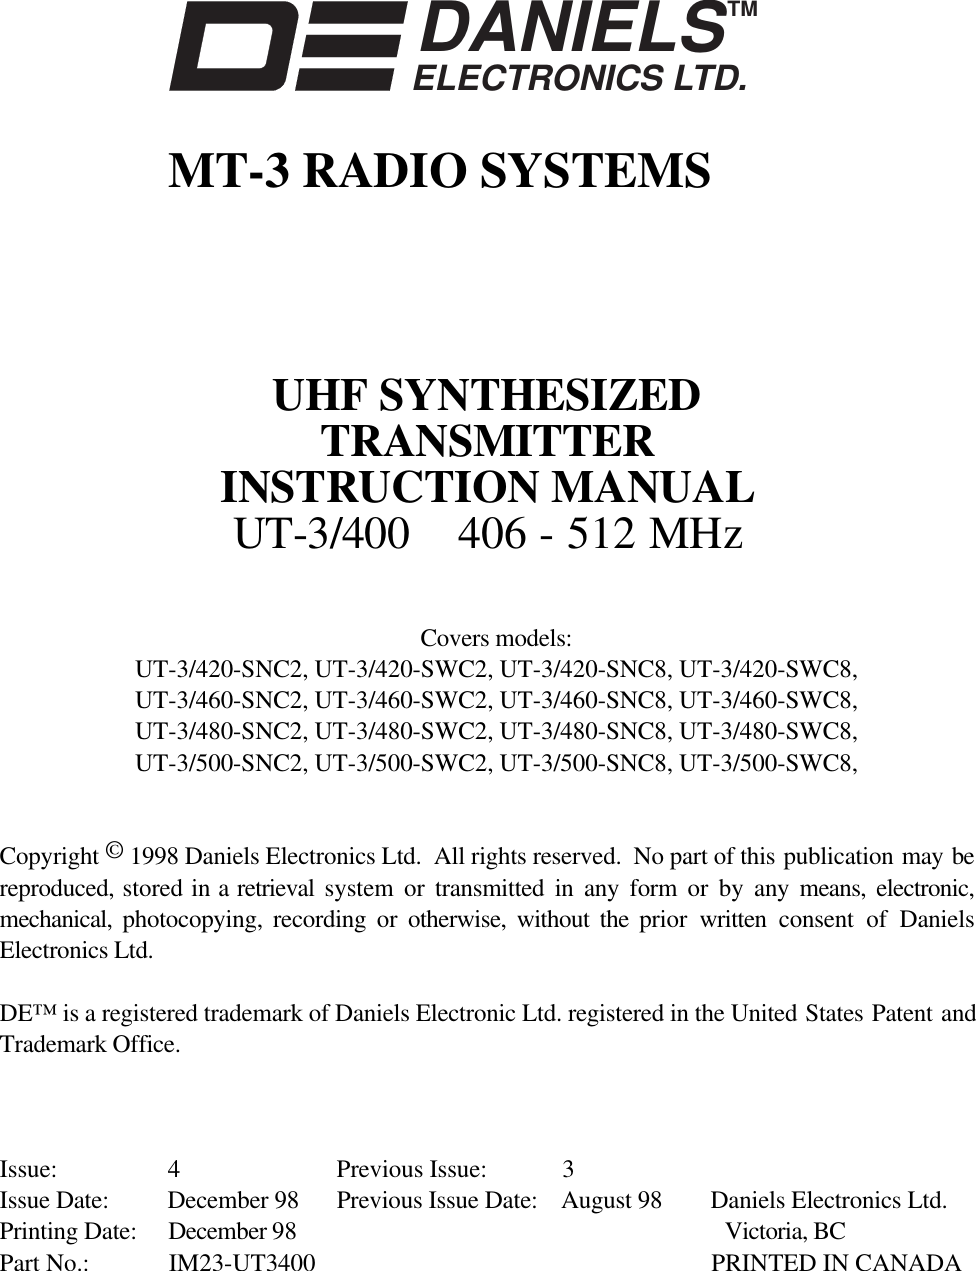 DANIELSELECTRONICS LTD.TMMT-3 RADIO SYSTEMSUHF SYNTHESIZEDTRANSMITTERINSTRUCTION MANUALUT-3/400 406 - 512 MHzCovers models:UT-3/420-SNC2, UT-3/420-SWC2, UT-3/420-SNC8, UT-3/420-SWC8,UT-3/460-SNC2, UT-3/460-SWC2, UT-3/460-SNC8, UT-3/460-SWC8,UT-3/480-SNC2, UT-3/480-SWC2, UT-3/480-SNC8, UT-3/480-SWC8,UT-3/500-SNC2, UT-3/500-SWC2, UT-3/500-SNC8, UT-3/500-SWC8,Copyright © 1998 Daniels Electronics Ltd.  All rights reserved.  No part of this publication may bereproduced, stored in a retrieval  system or transmitted in any form or by any means, electronic,mechanical,  photocopying, recording or otherwise, without the prior  written consent of DanielsElectronics Ltd.DE™ is a registered trademark of Daniels Electronic Ltd. registered in the United States Patent andTrademark Office.Issue: 4 Previous Issue: 3Issue Date: December 98 Previous Issue Date: August 98 Daniels Electronics Ltd.Printing Date: December 98 Victoria, BCPart No.: IM23-UT3400 PRINTED IN CANADA